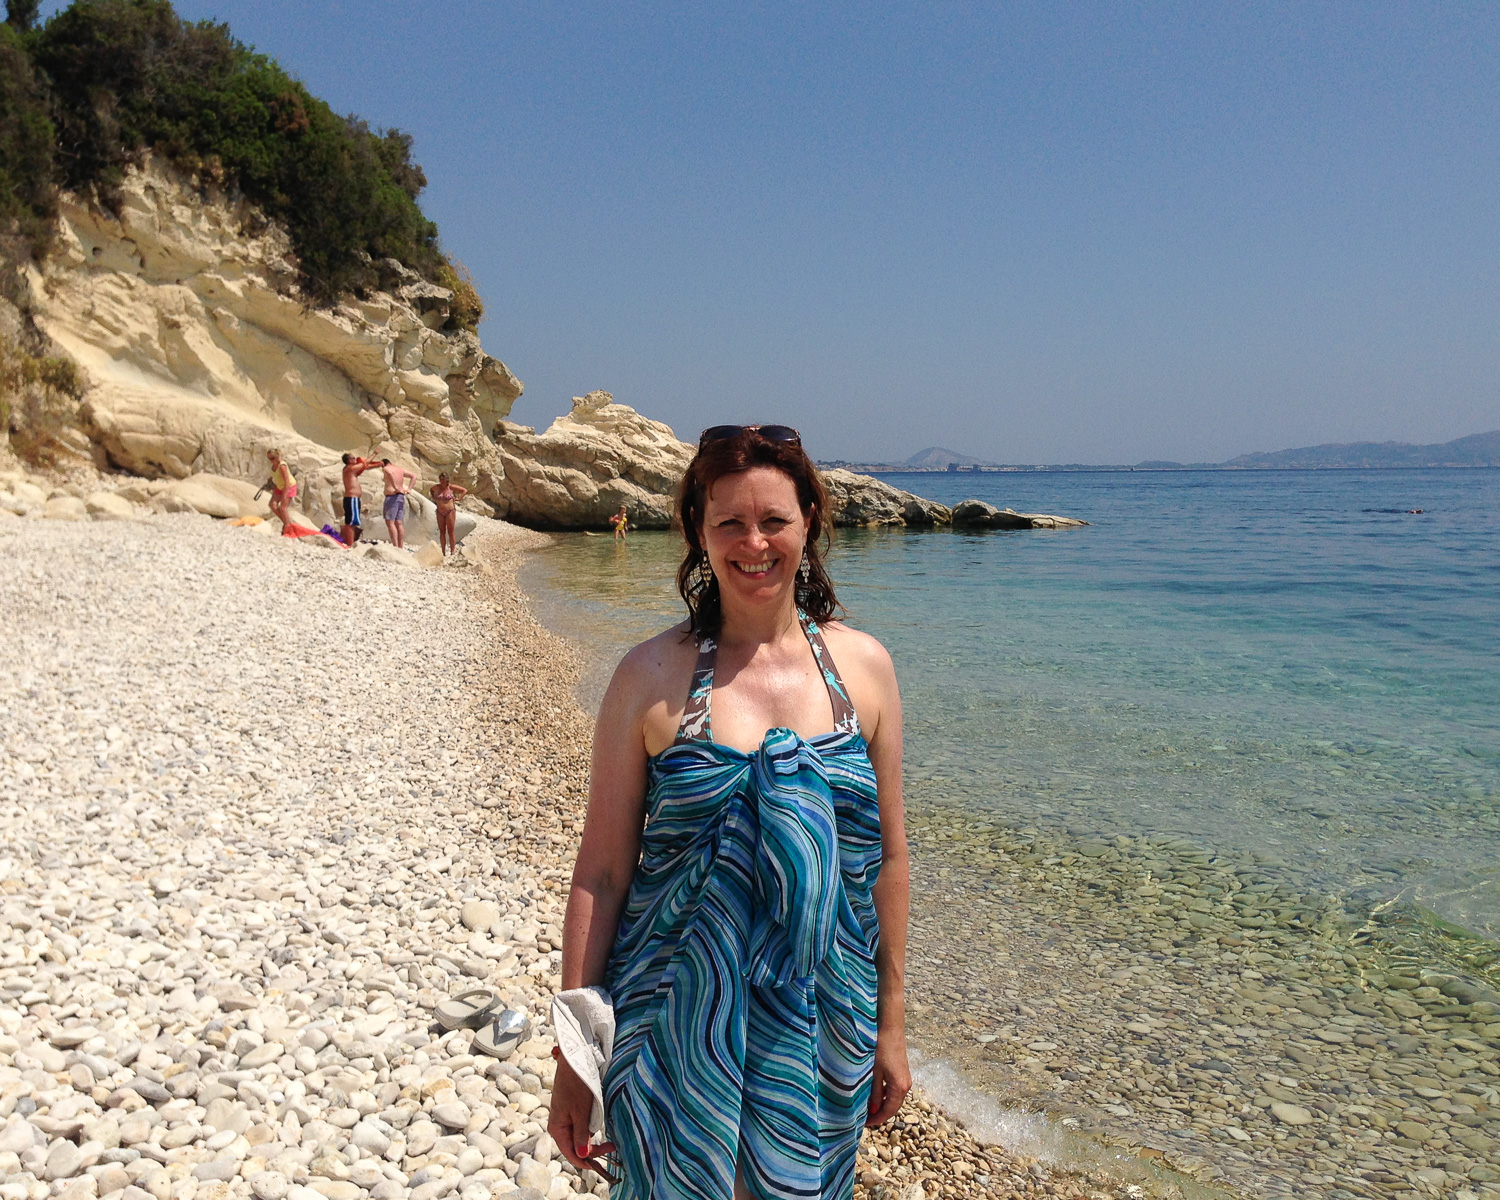 6 things the English girls get wrong on the beach in Greece!